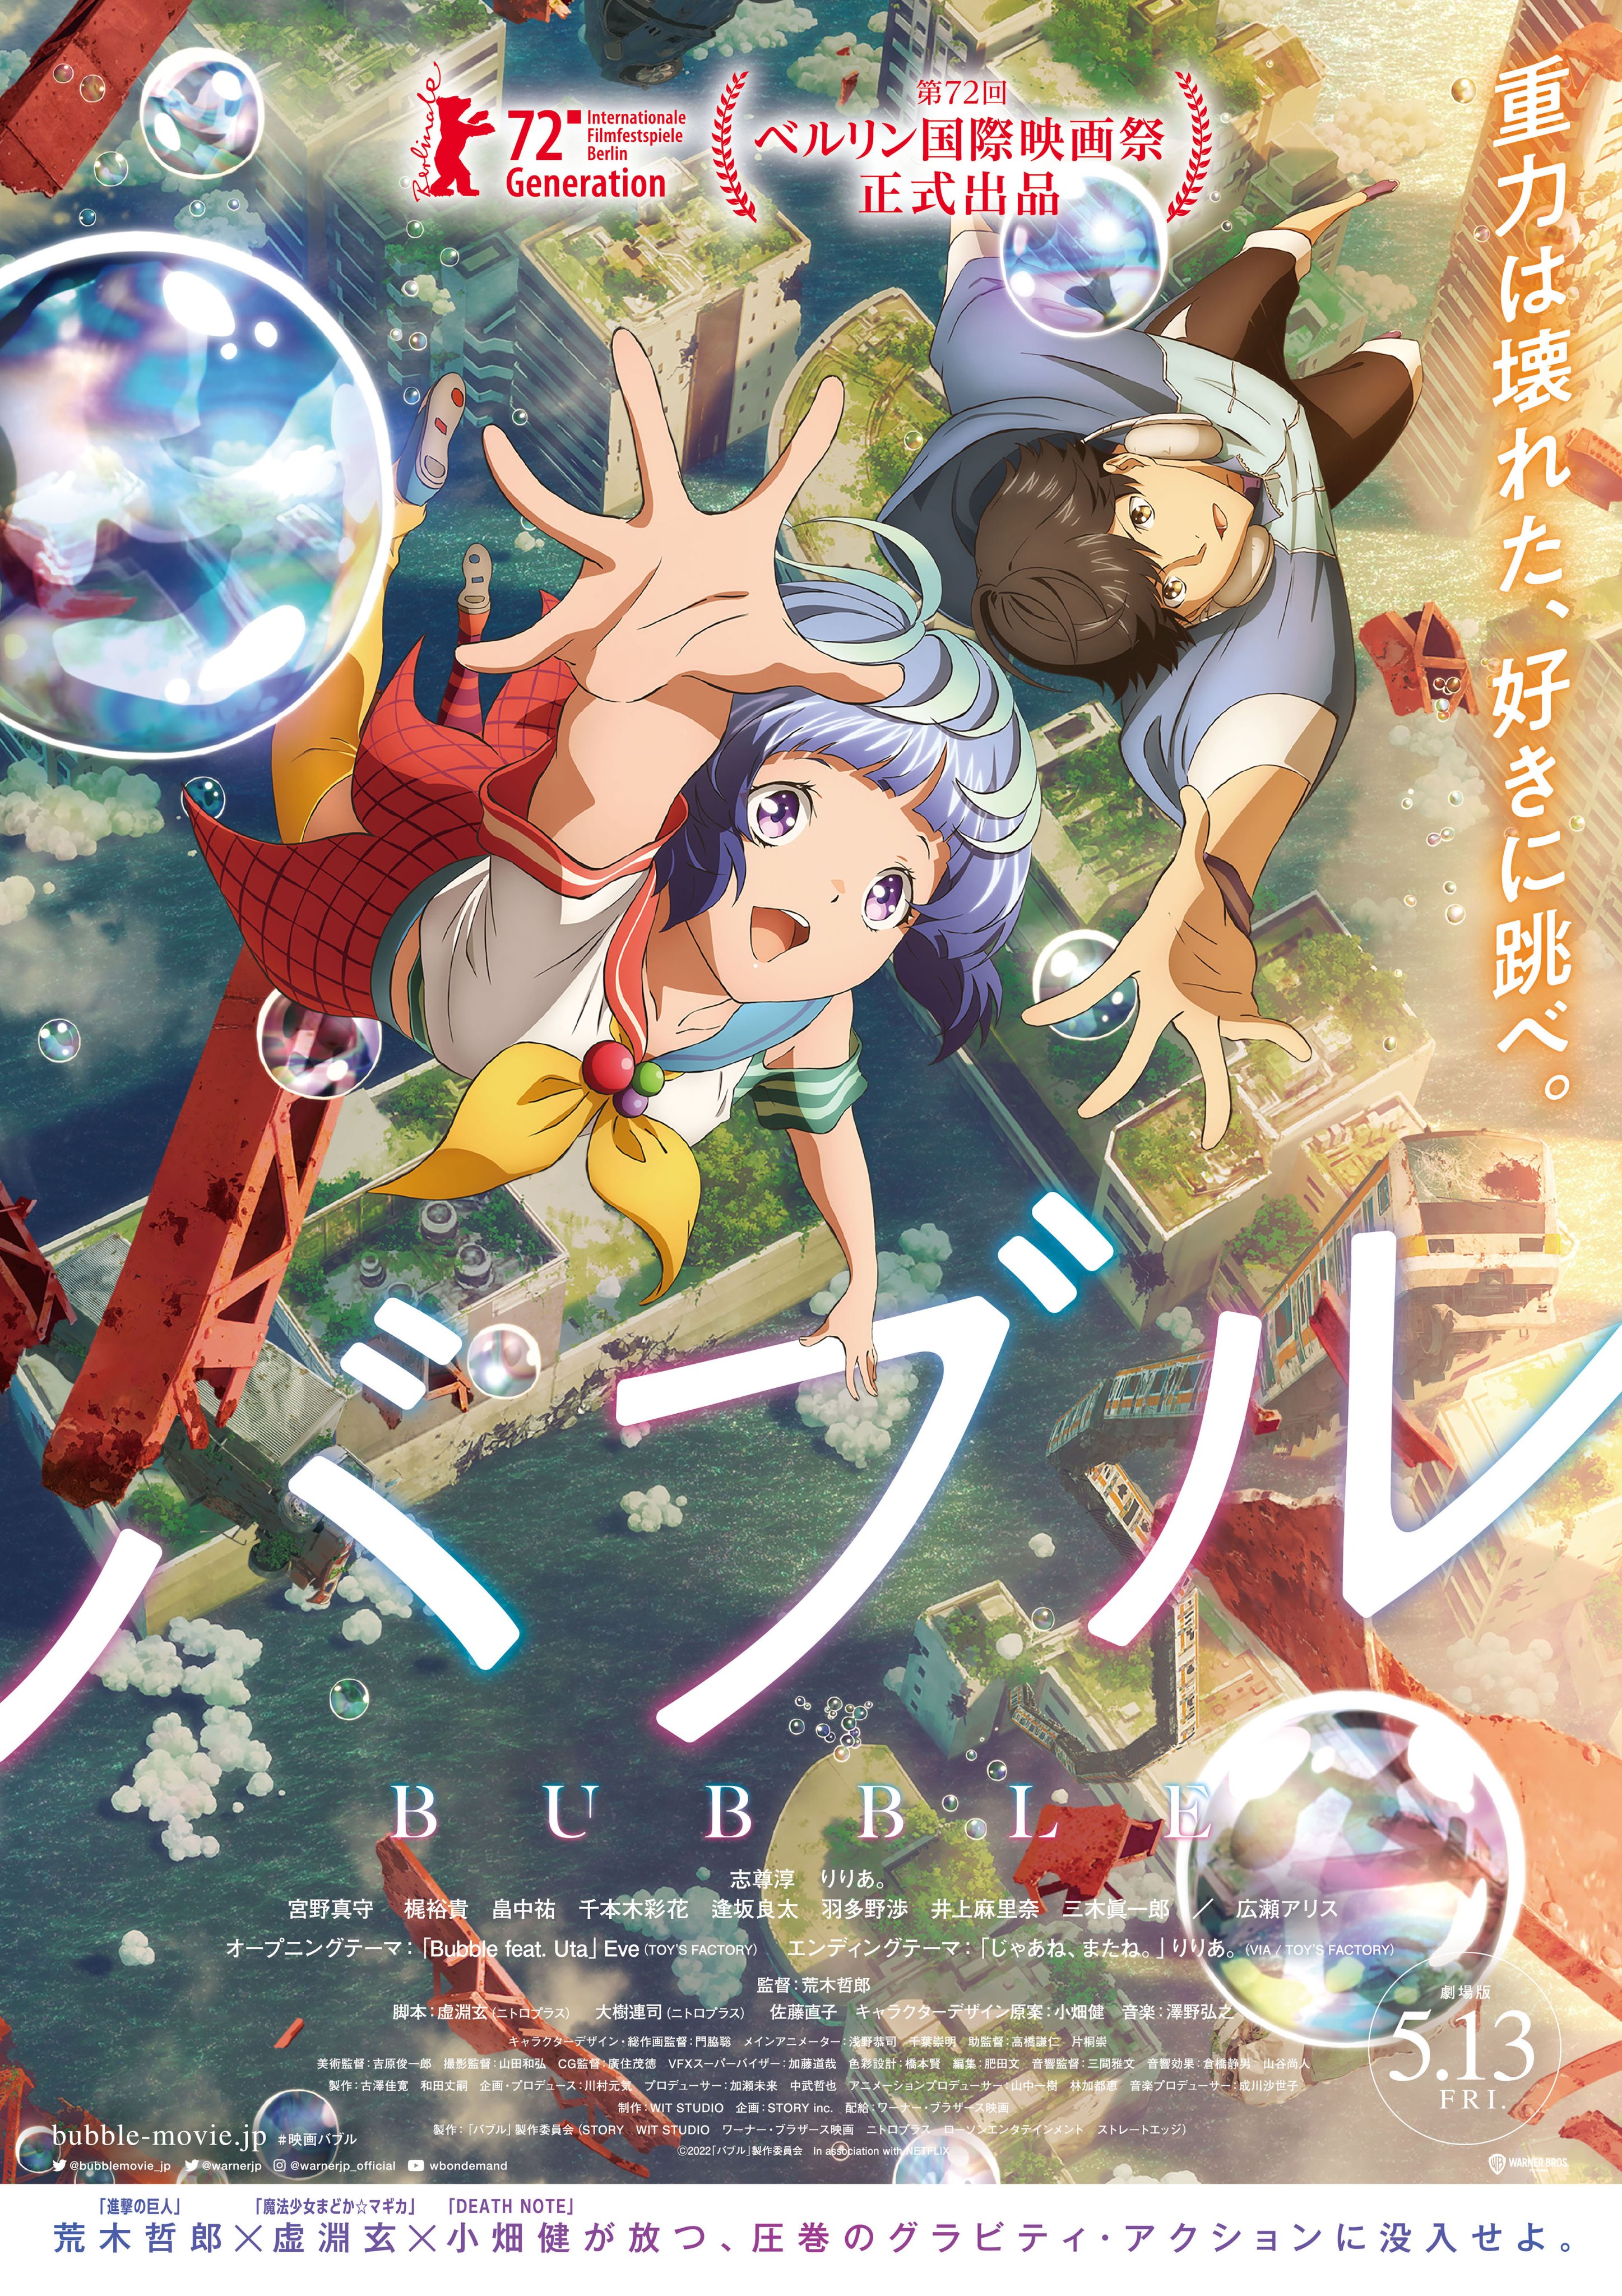 WIT Studios Bubble Anime Film Teases Story in New Trailer